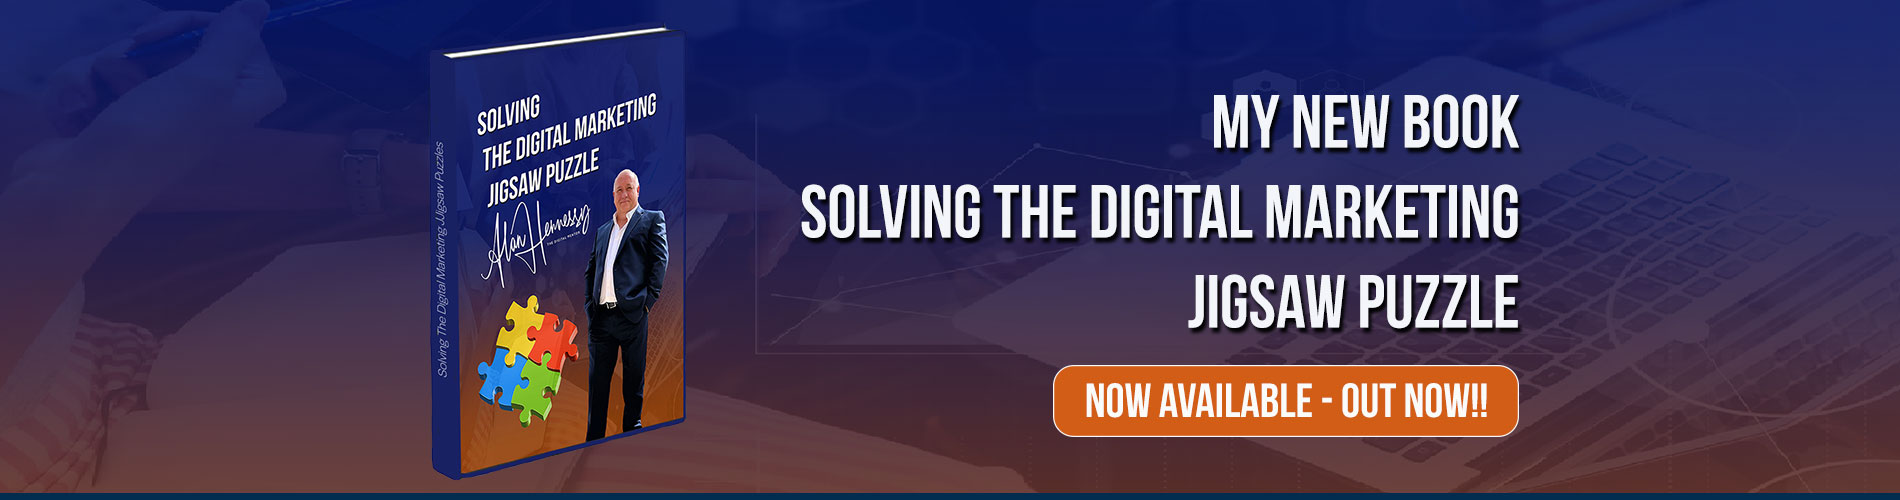 Solving The Digital Marketing Jigsaw Puzzle Book - Available Now Out Now